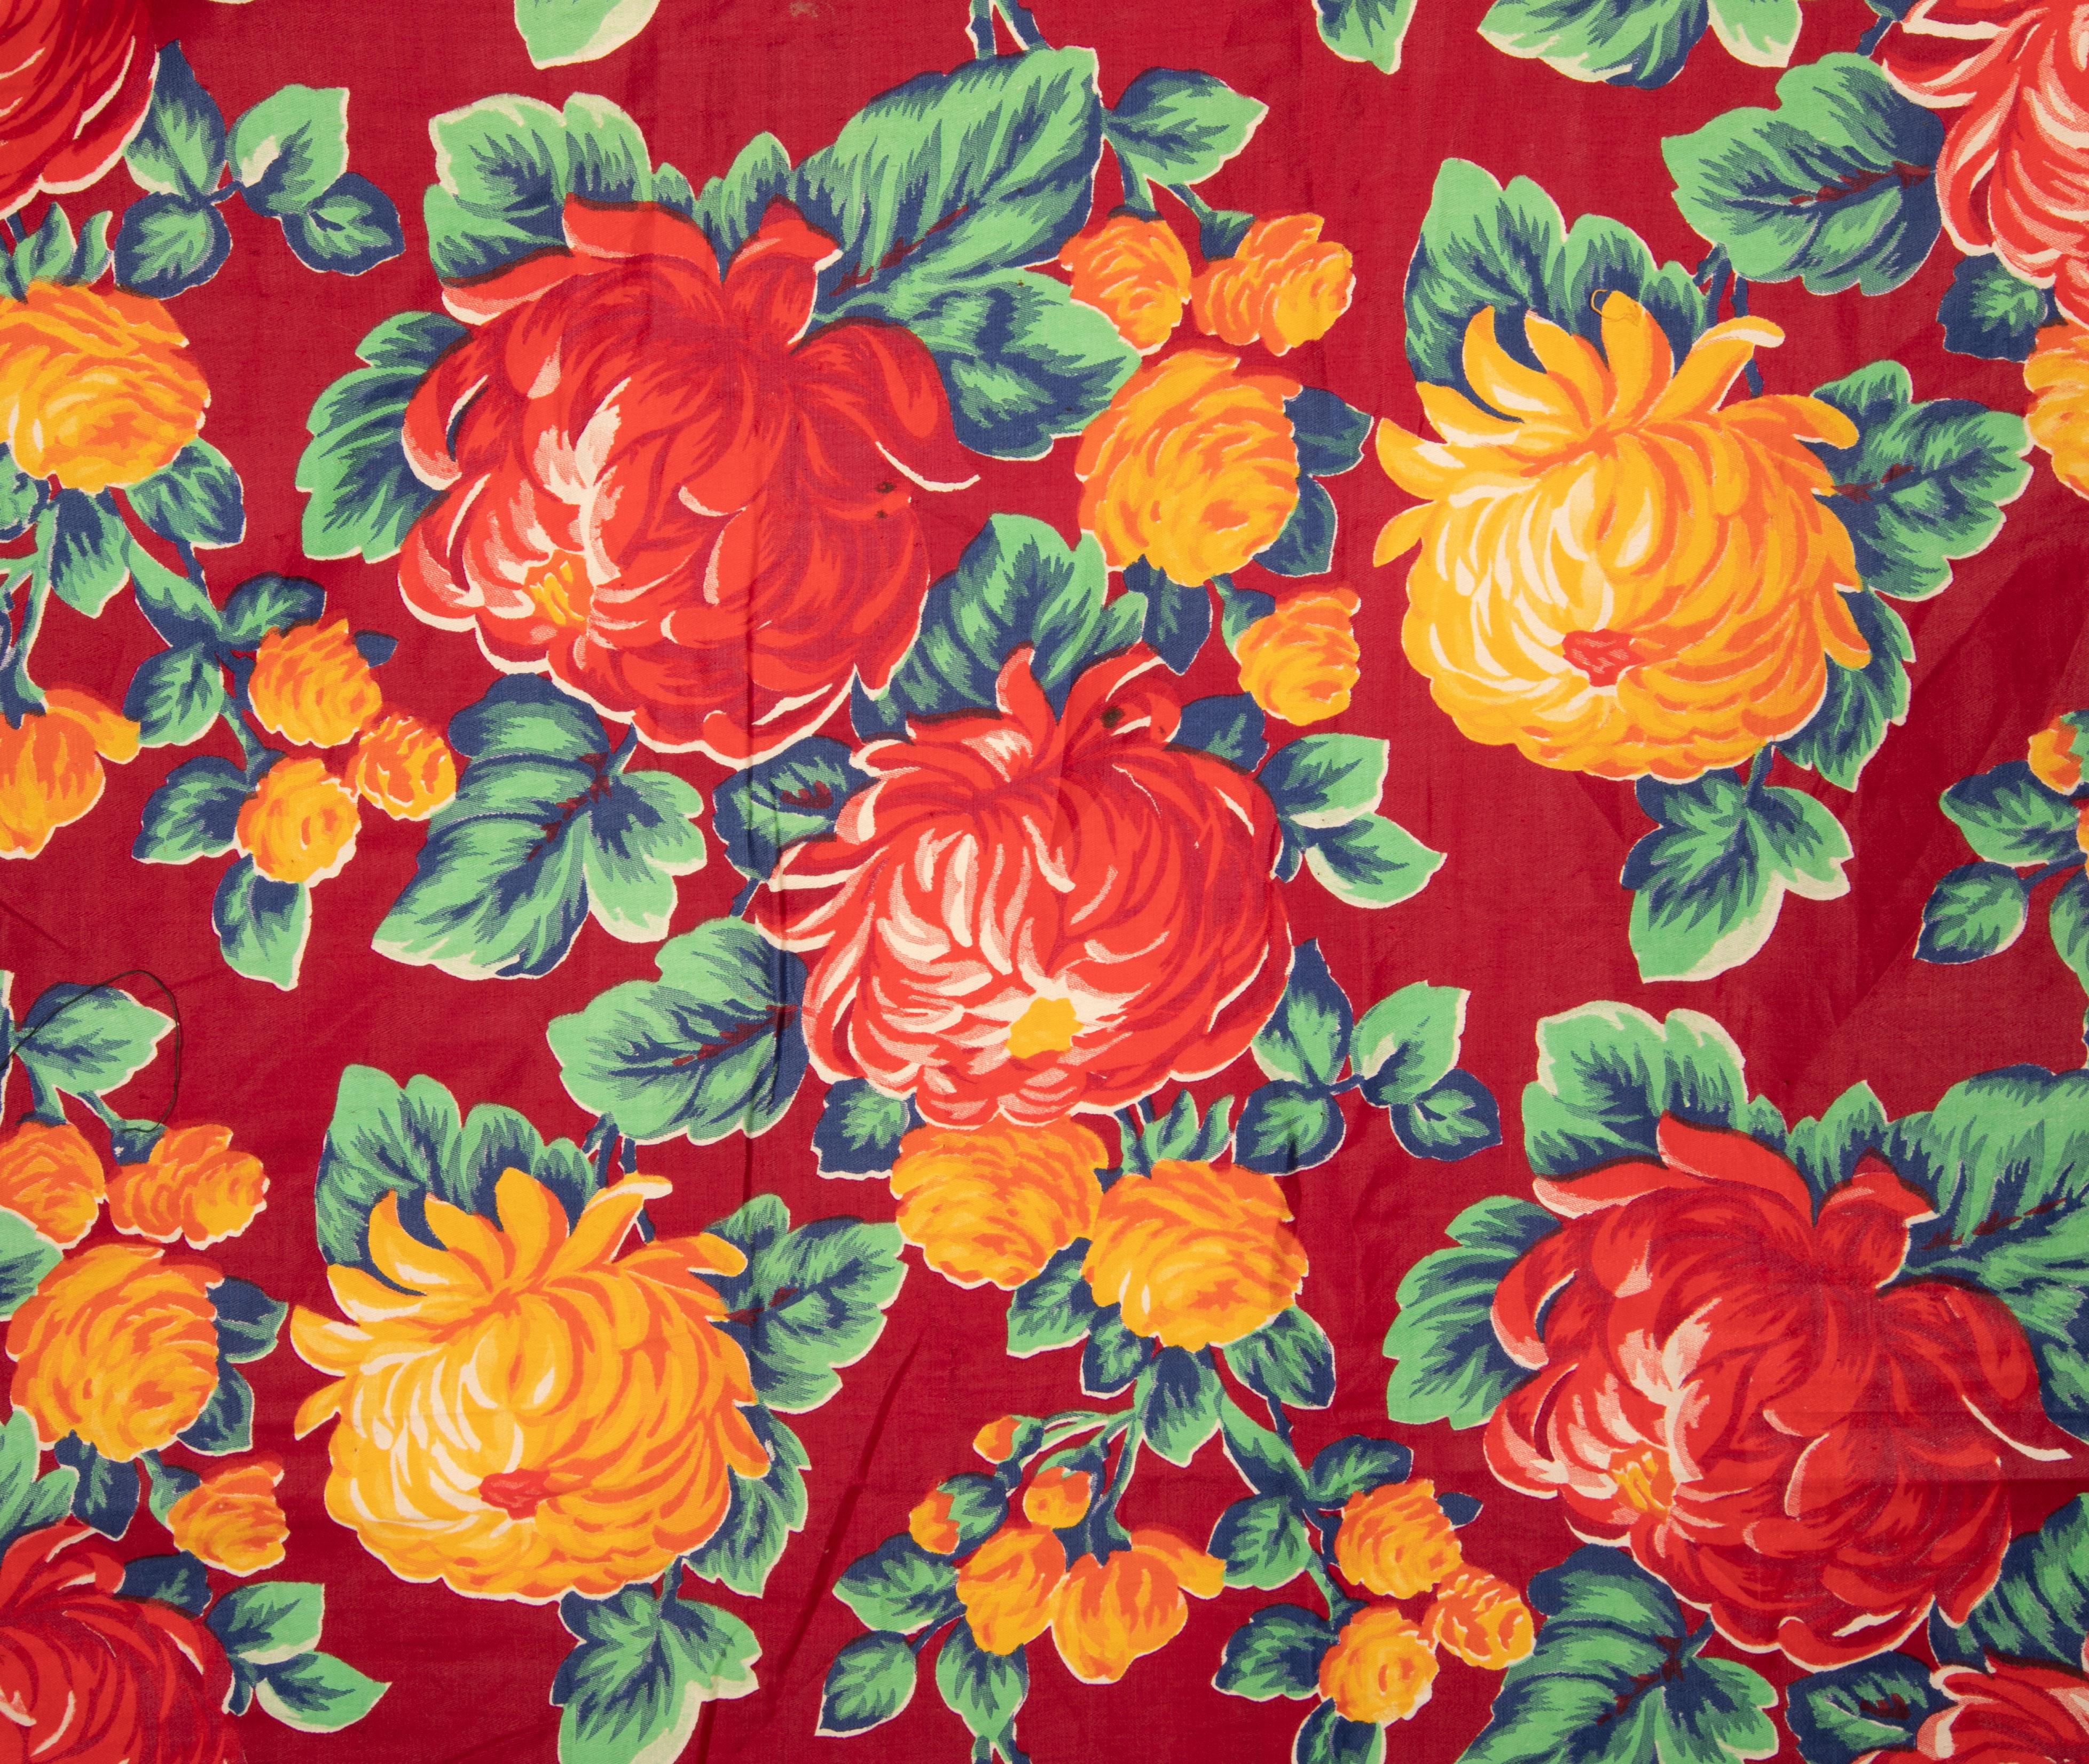 Woven Russian Roller Printed Cotton Fabric Panel, Mid-20th Century or Earlier